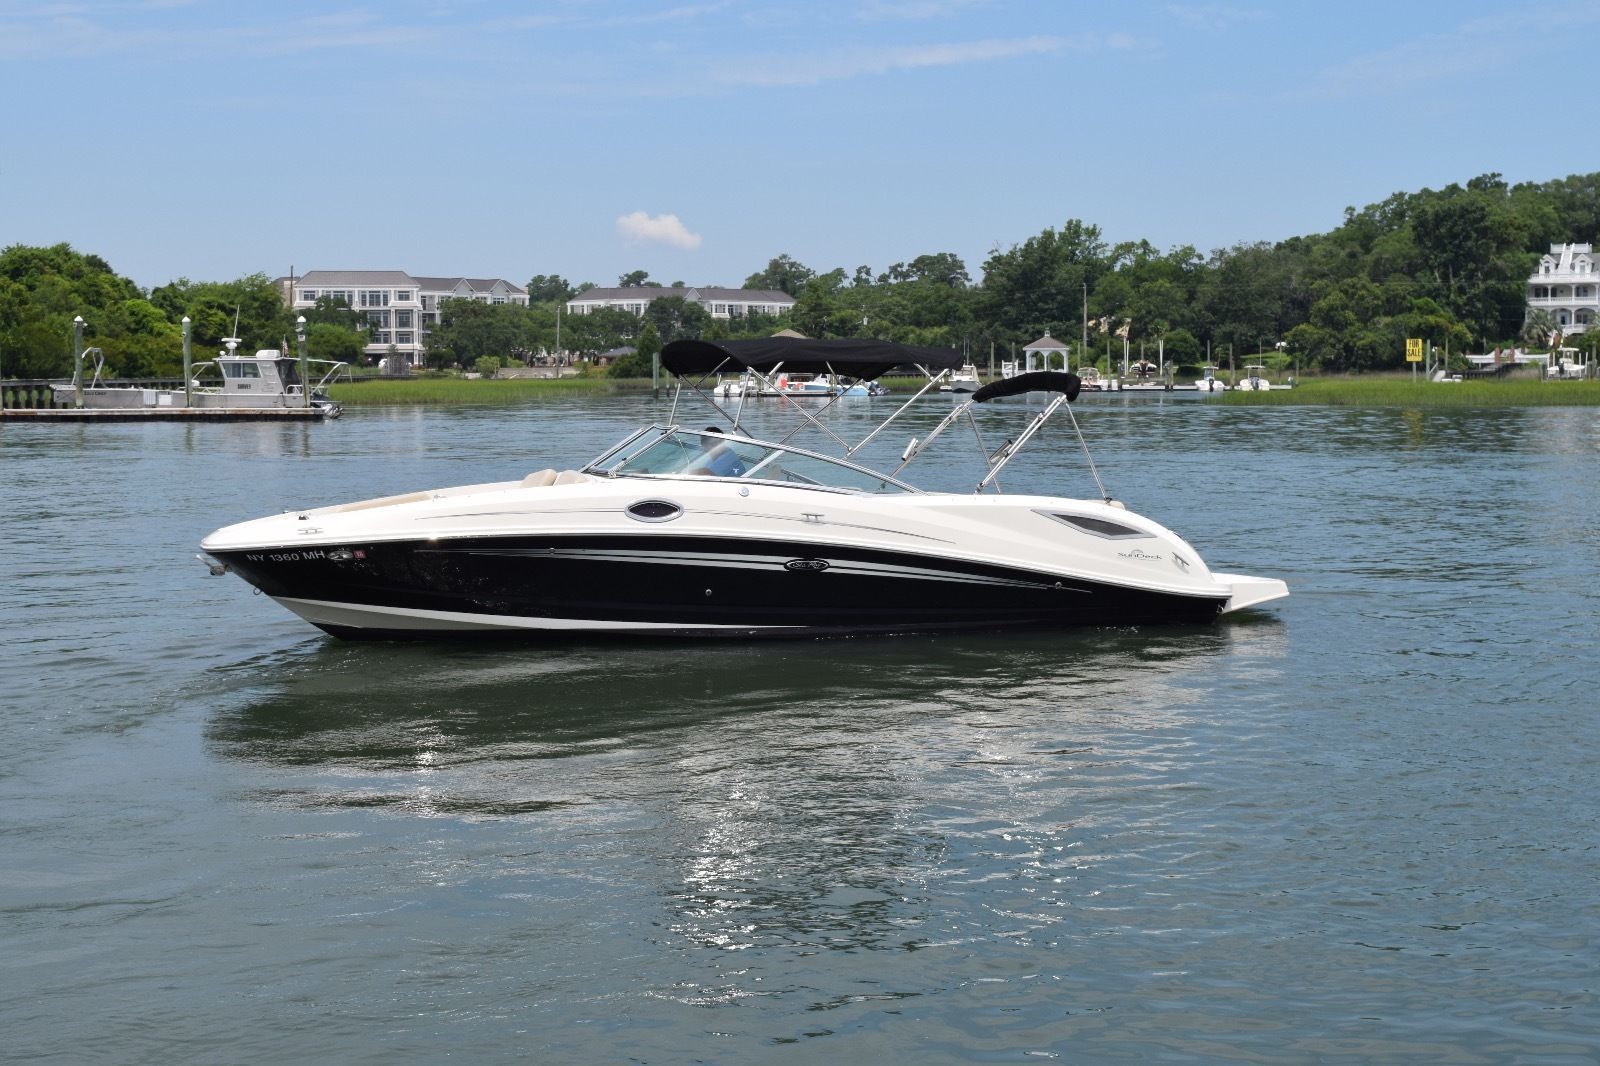 Sea Ray 290 Sundeck 2009 for sale for $40,000 - Boats-from ...